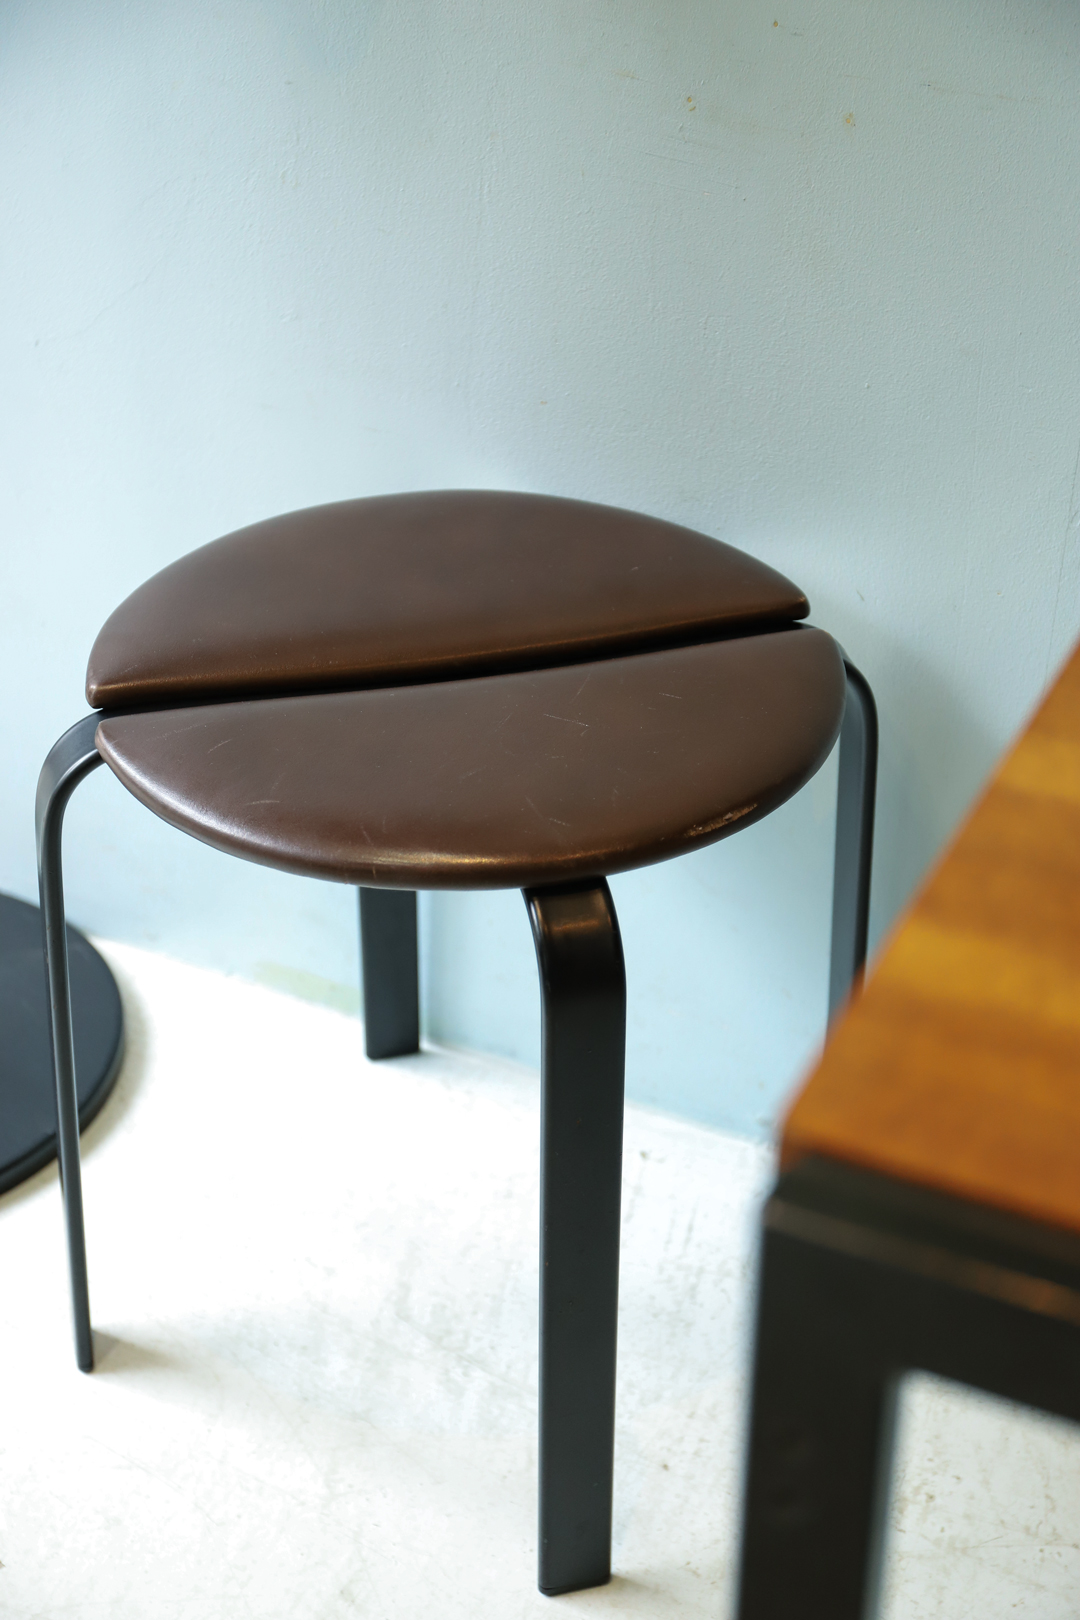 Danish Modern Design Stool by BKS/ スツール デンマークモダン チェア北欧 ヴィンテージ 椅子